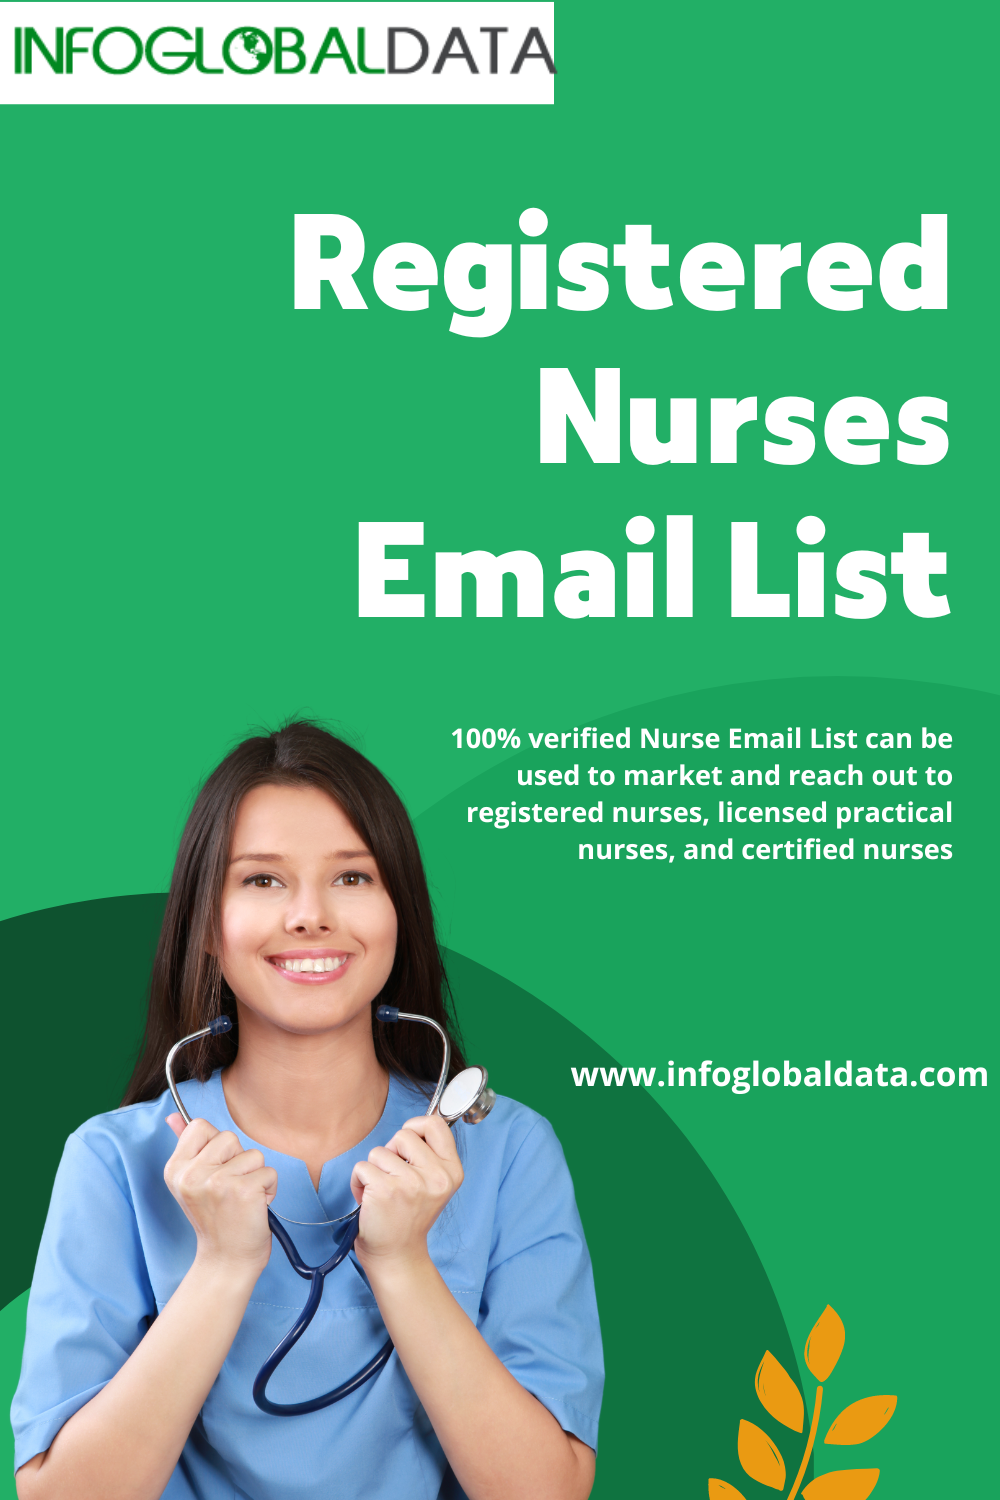 What Are The Benefits Of Buying Nurses Email List